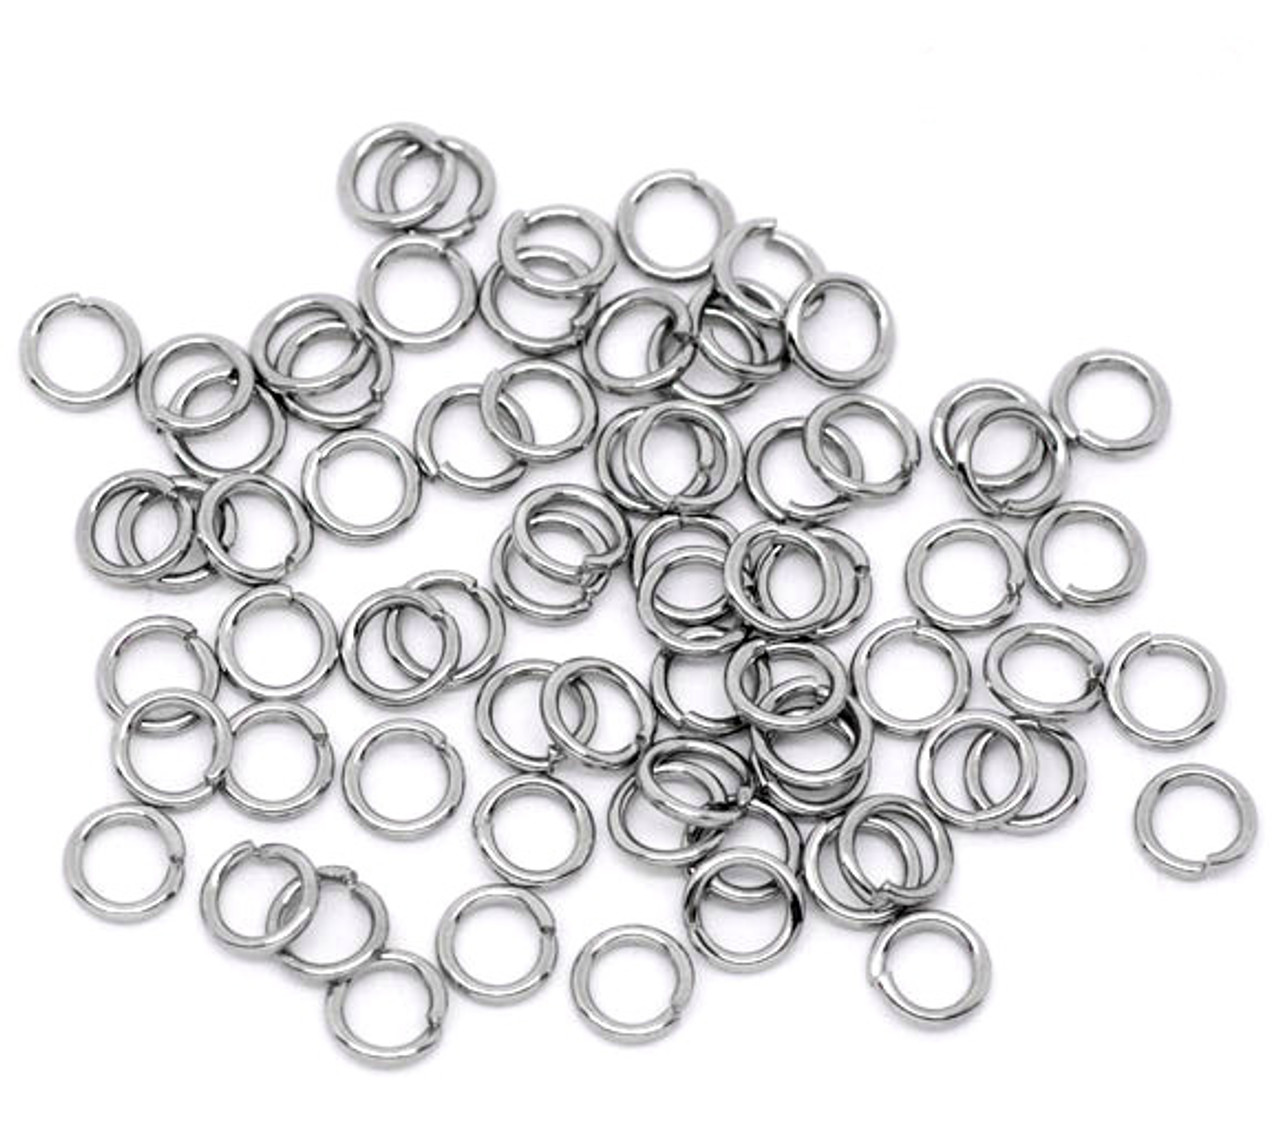 1M Stainless Steel Link Jump Rings for Jewelry Making Water